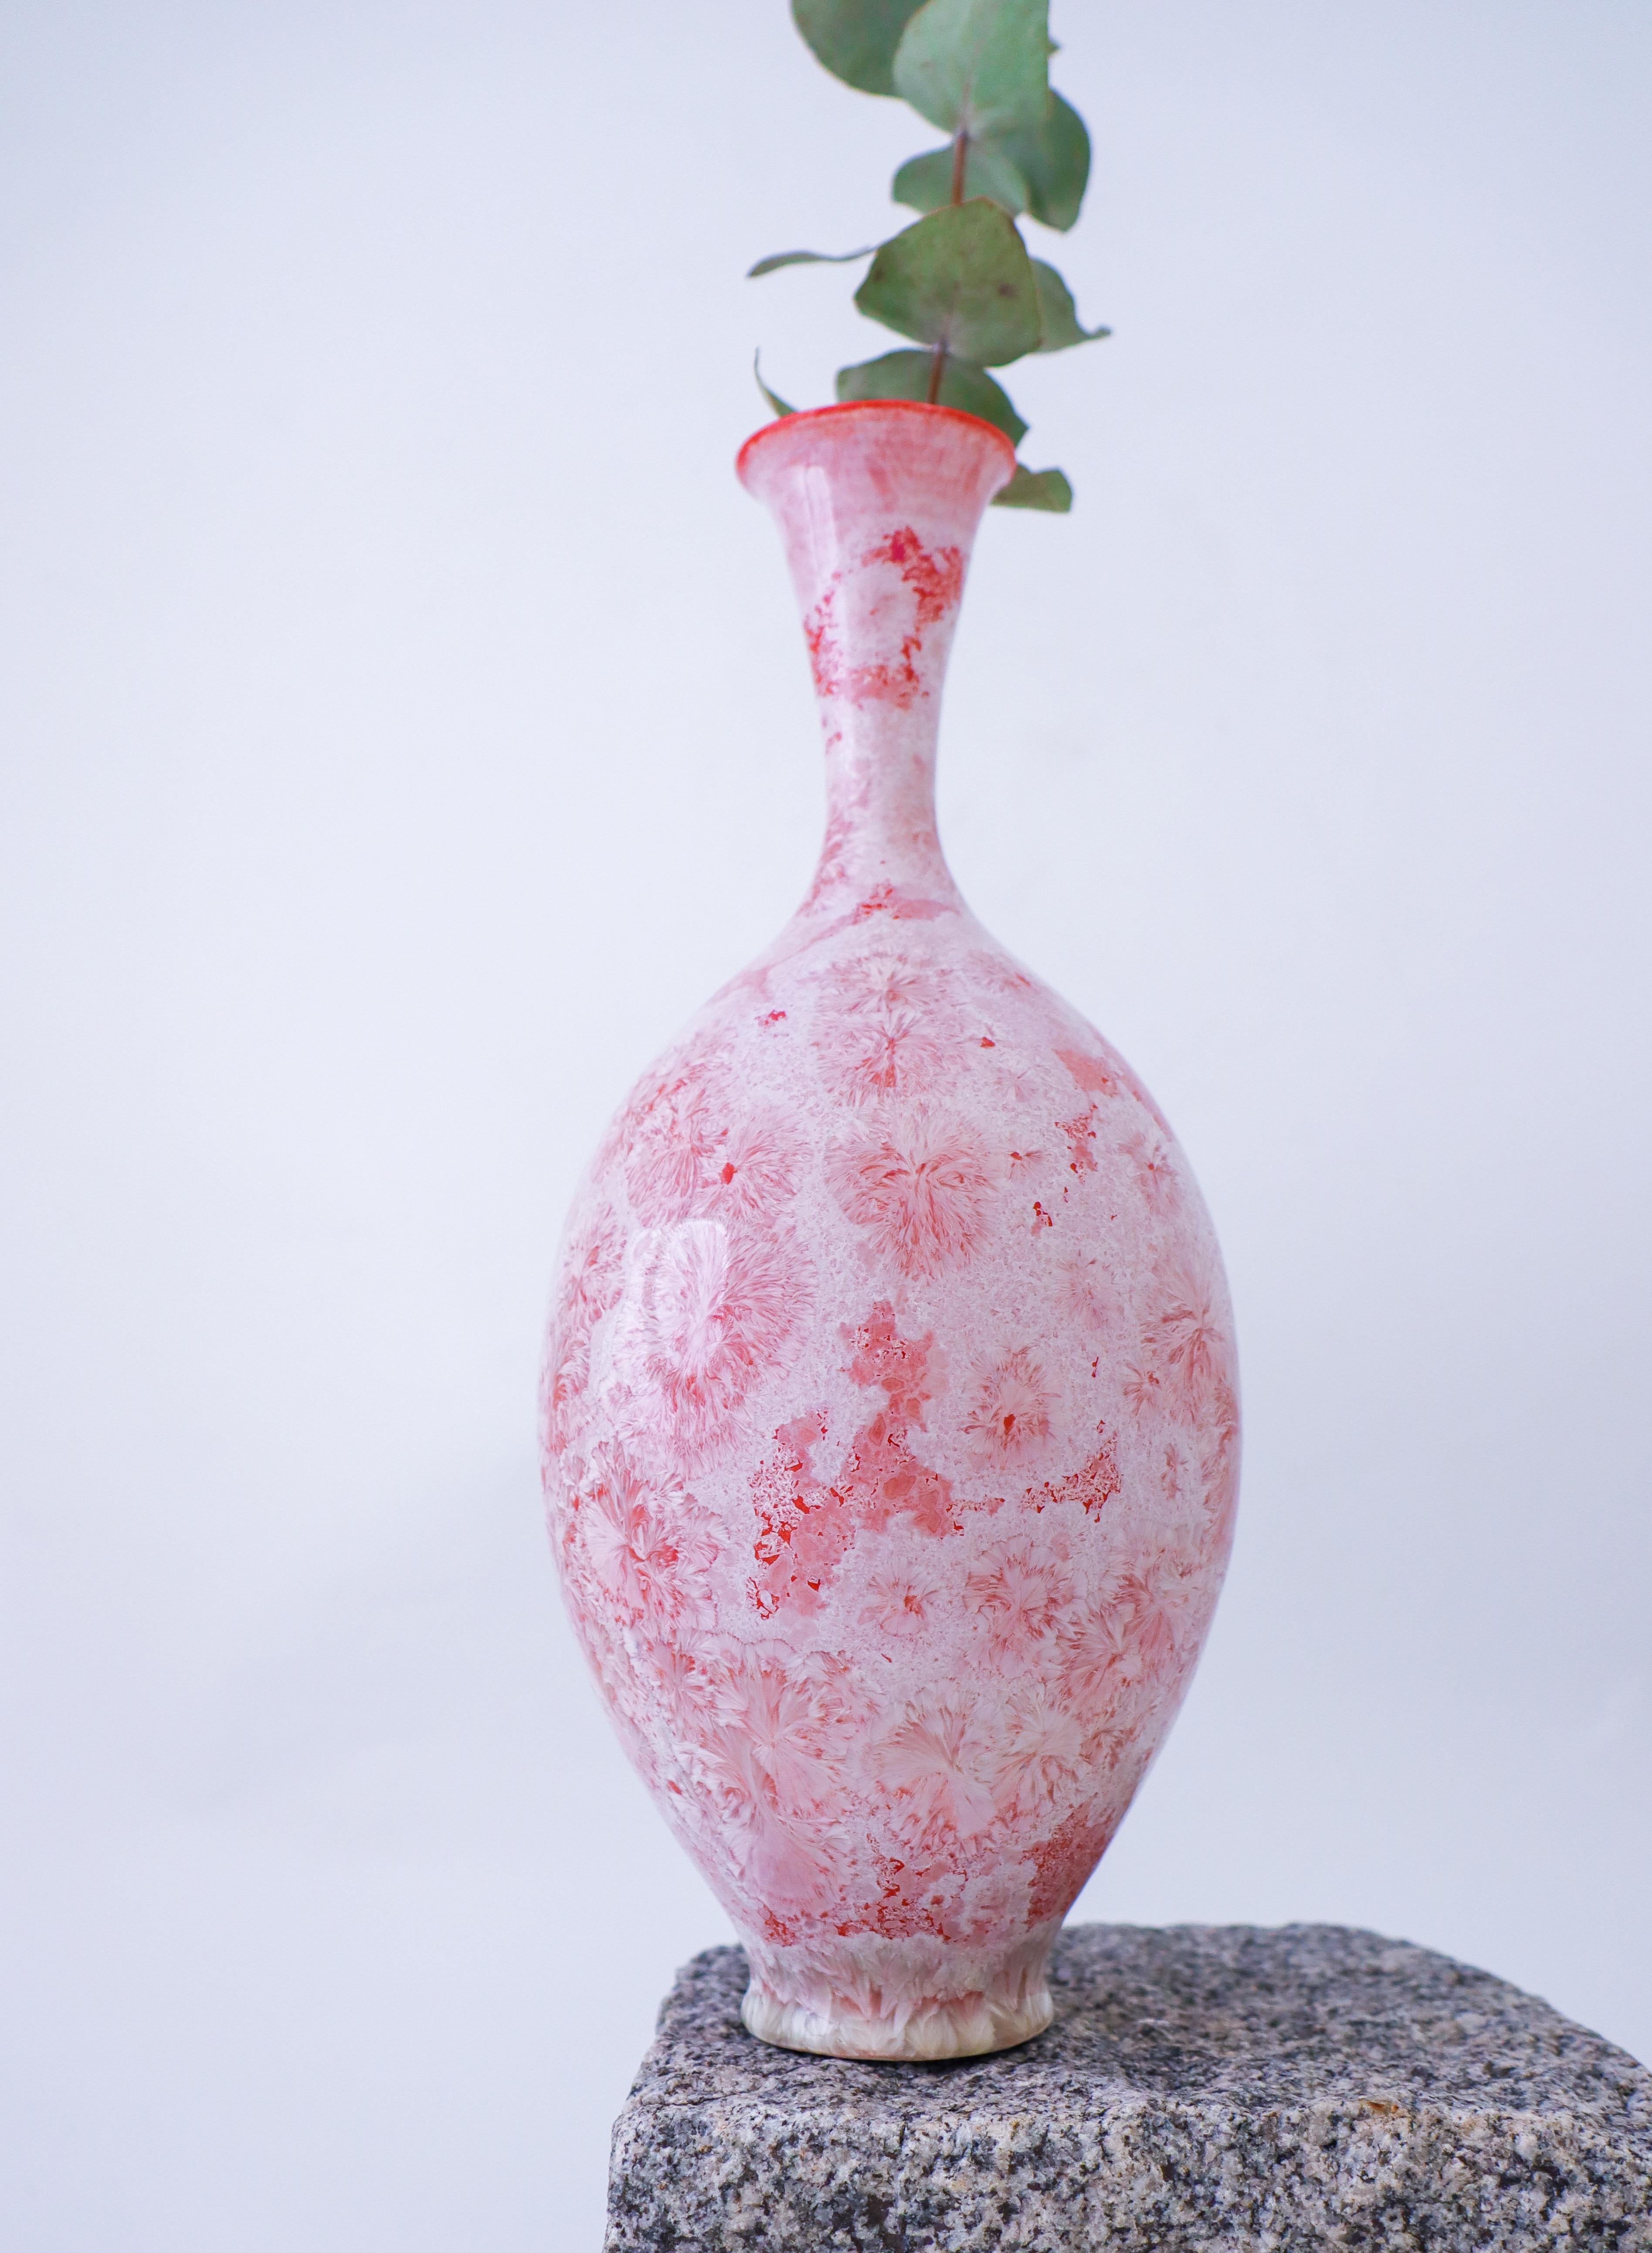 A red & white vase with a crystalline glaze designed by Isak Isaksson in Sweden. The vase is 30 cm (12